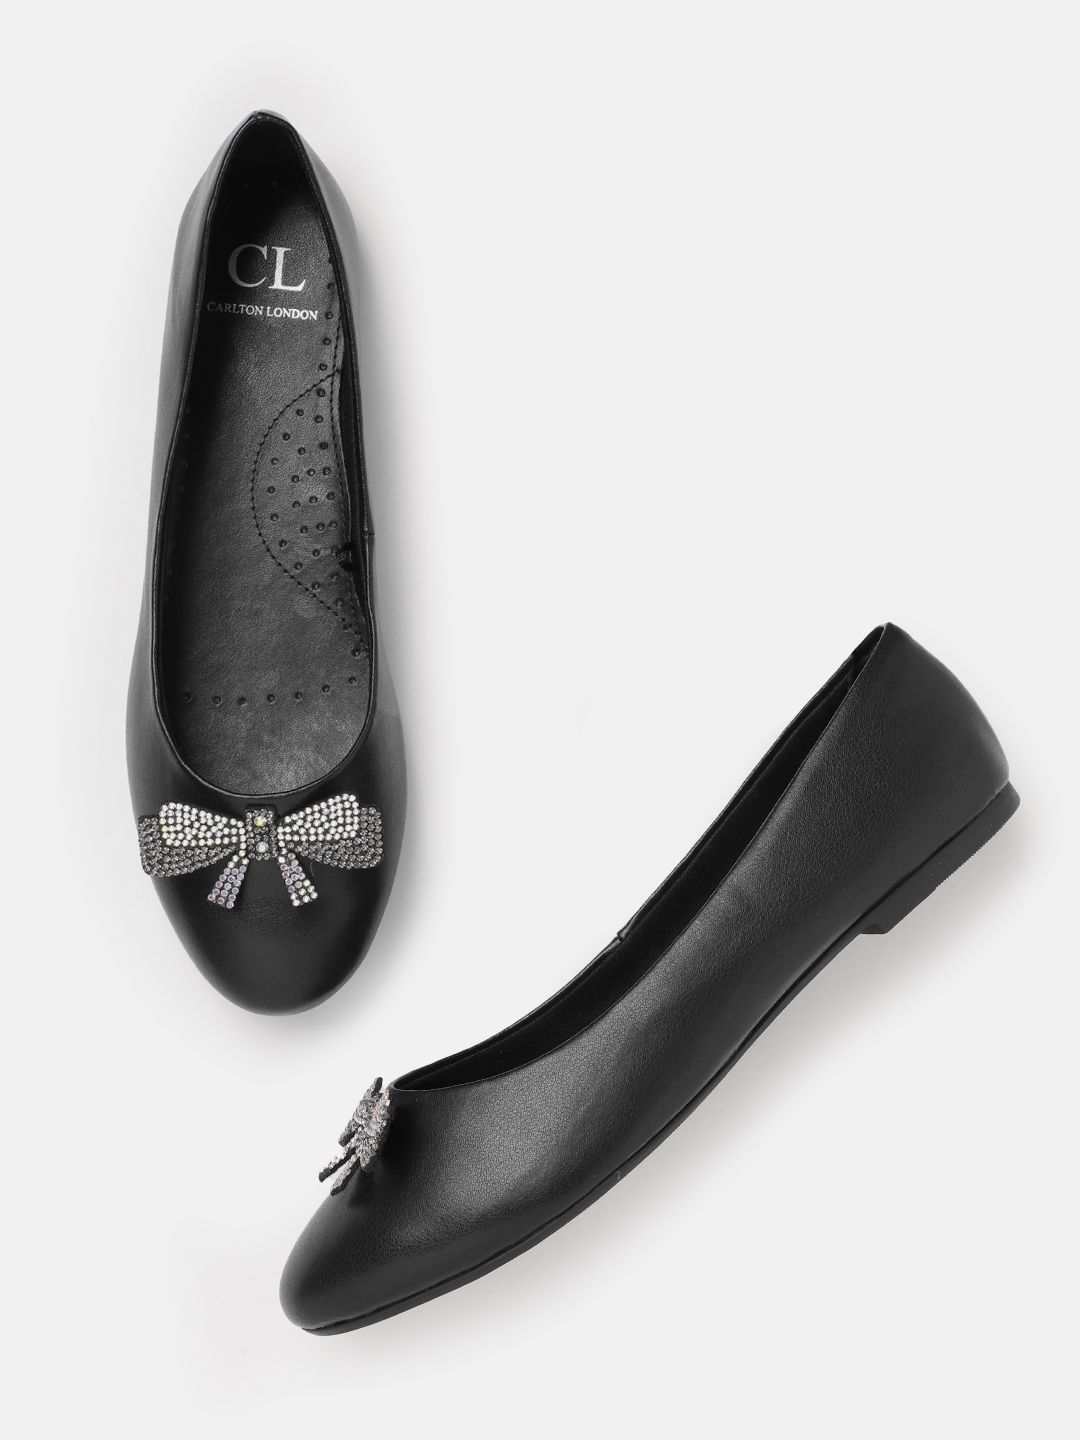 Carlton London Women Black Solid Ballerinas with Bow Detail Price in India